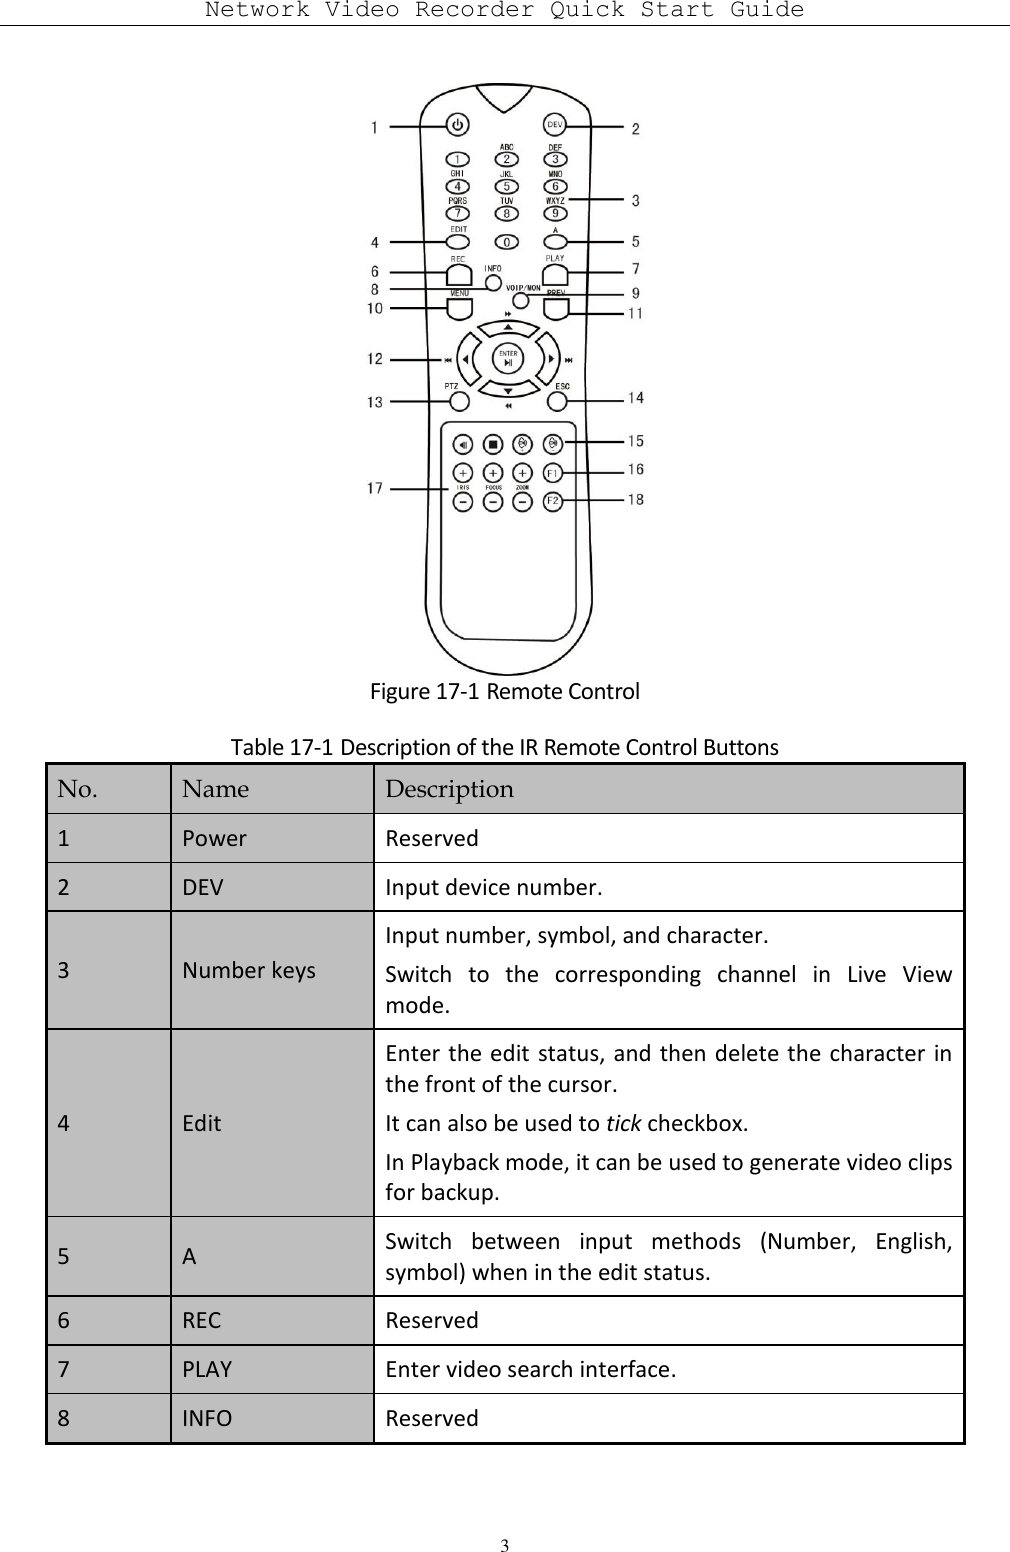 Network Video Recorder Quick Start Guide 3  Figure 17-1 Remote Control Table 17-1 Description of the IR Remote Control Buttons No. Name Description 1 Power Reserved   2 DEV Input device number. 3 Number keys Input number, symbol, and character. Switch  to  the  corresponding  channel  in  Live  View mode. 4 Edit Enter the edit status, and then delete the character in the front of the cursor. It can also be used to tick checkbox. In Playback mode, it can be used to generate video clips for backup. 5 A Switch  between  input  methods  (Number,  English, symbol) when in the edit status. 6 REC Reserved 7 PLAY Enter video search interface. 8 INFO Reserved 